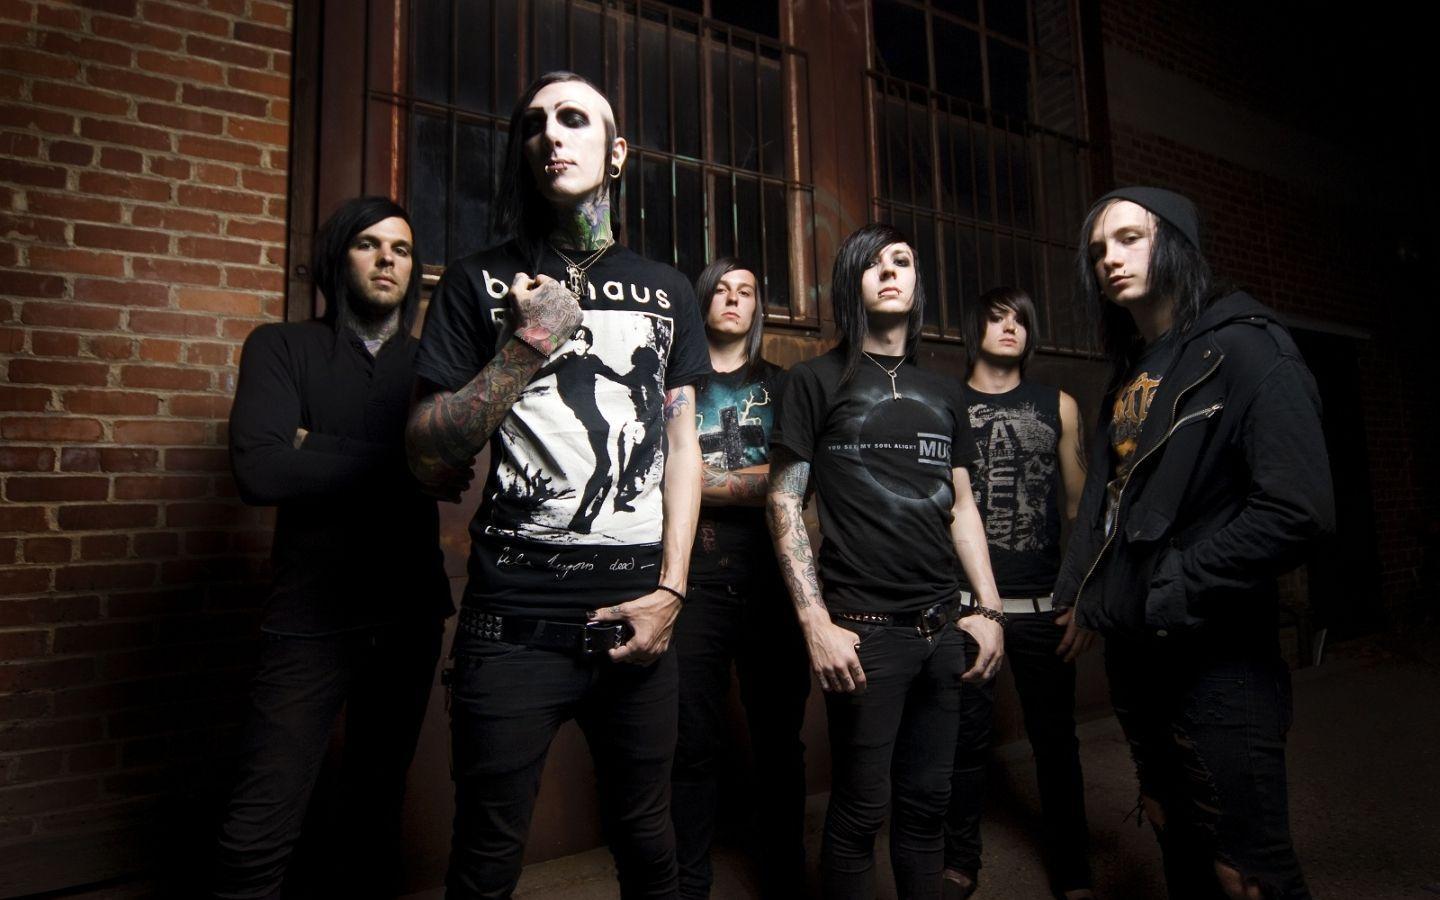 Altwall: Скачать Motionless In White wallpapers